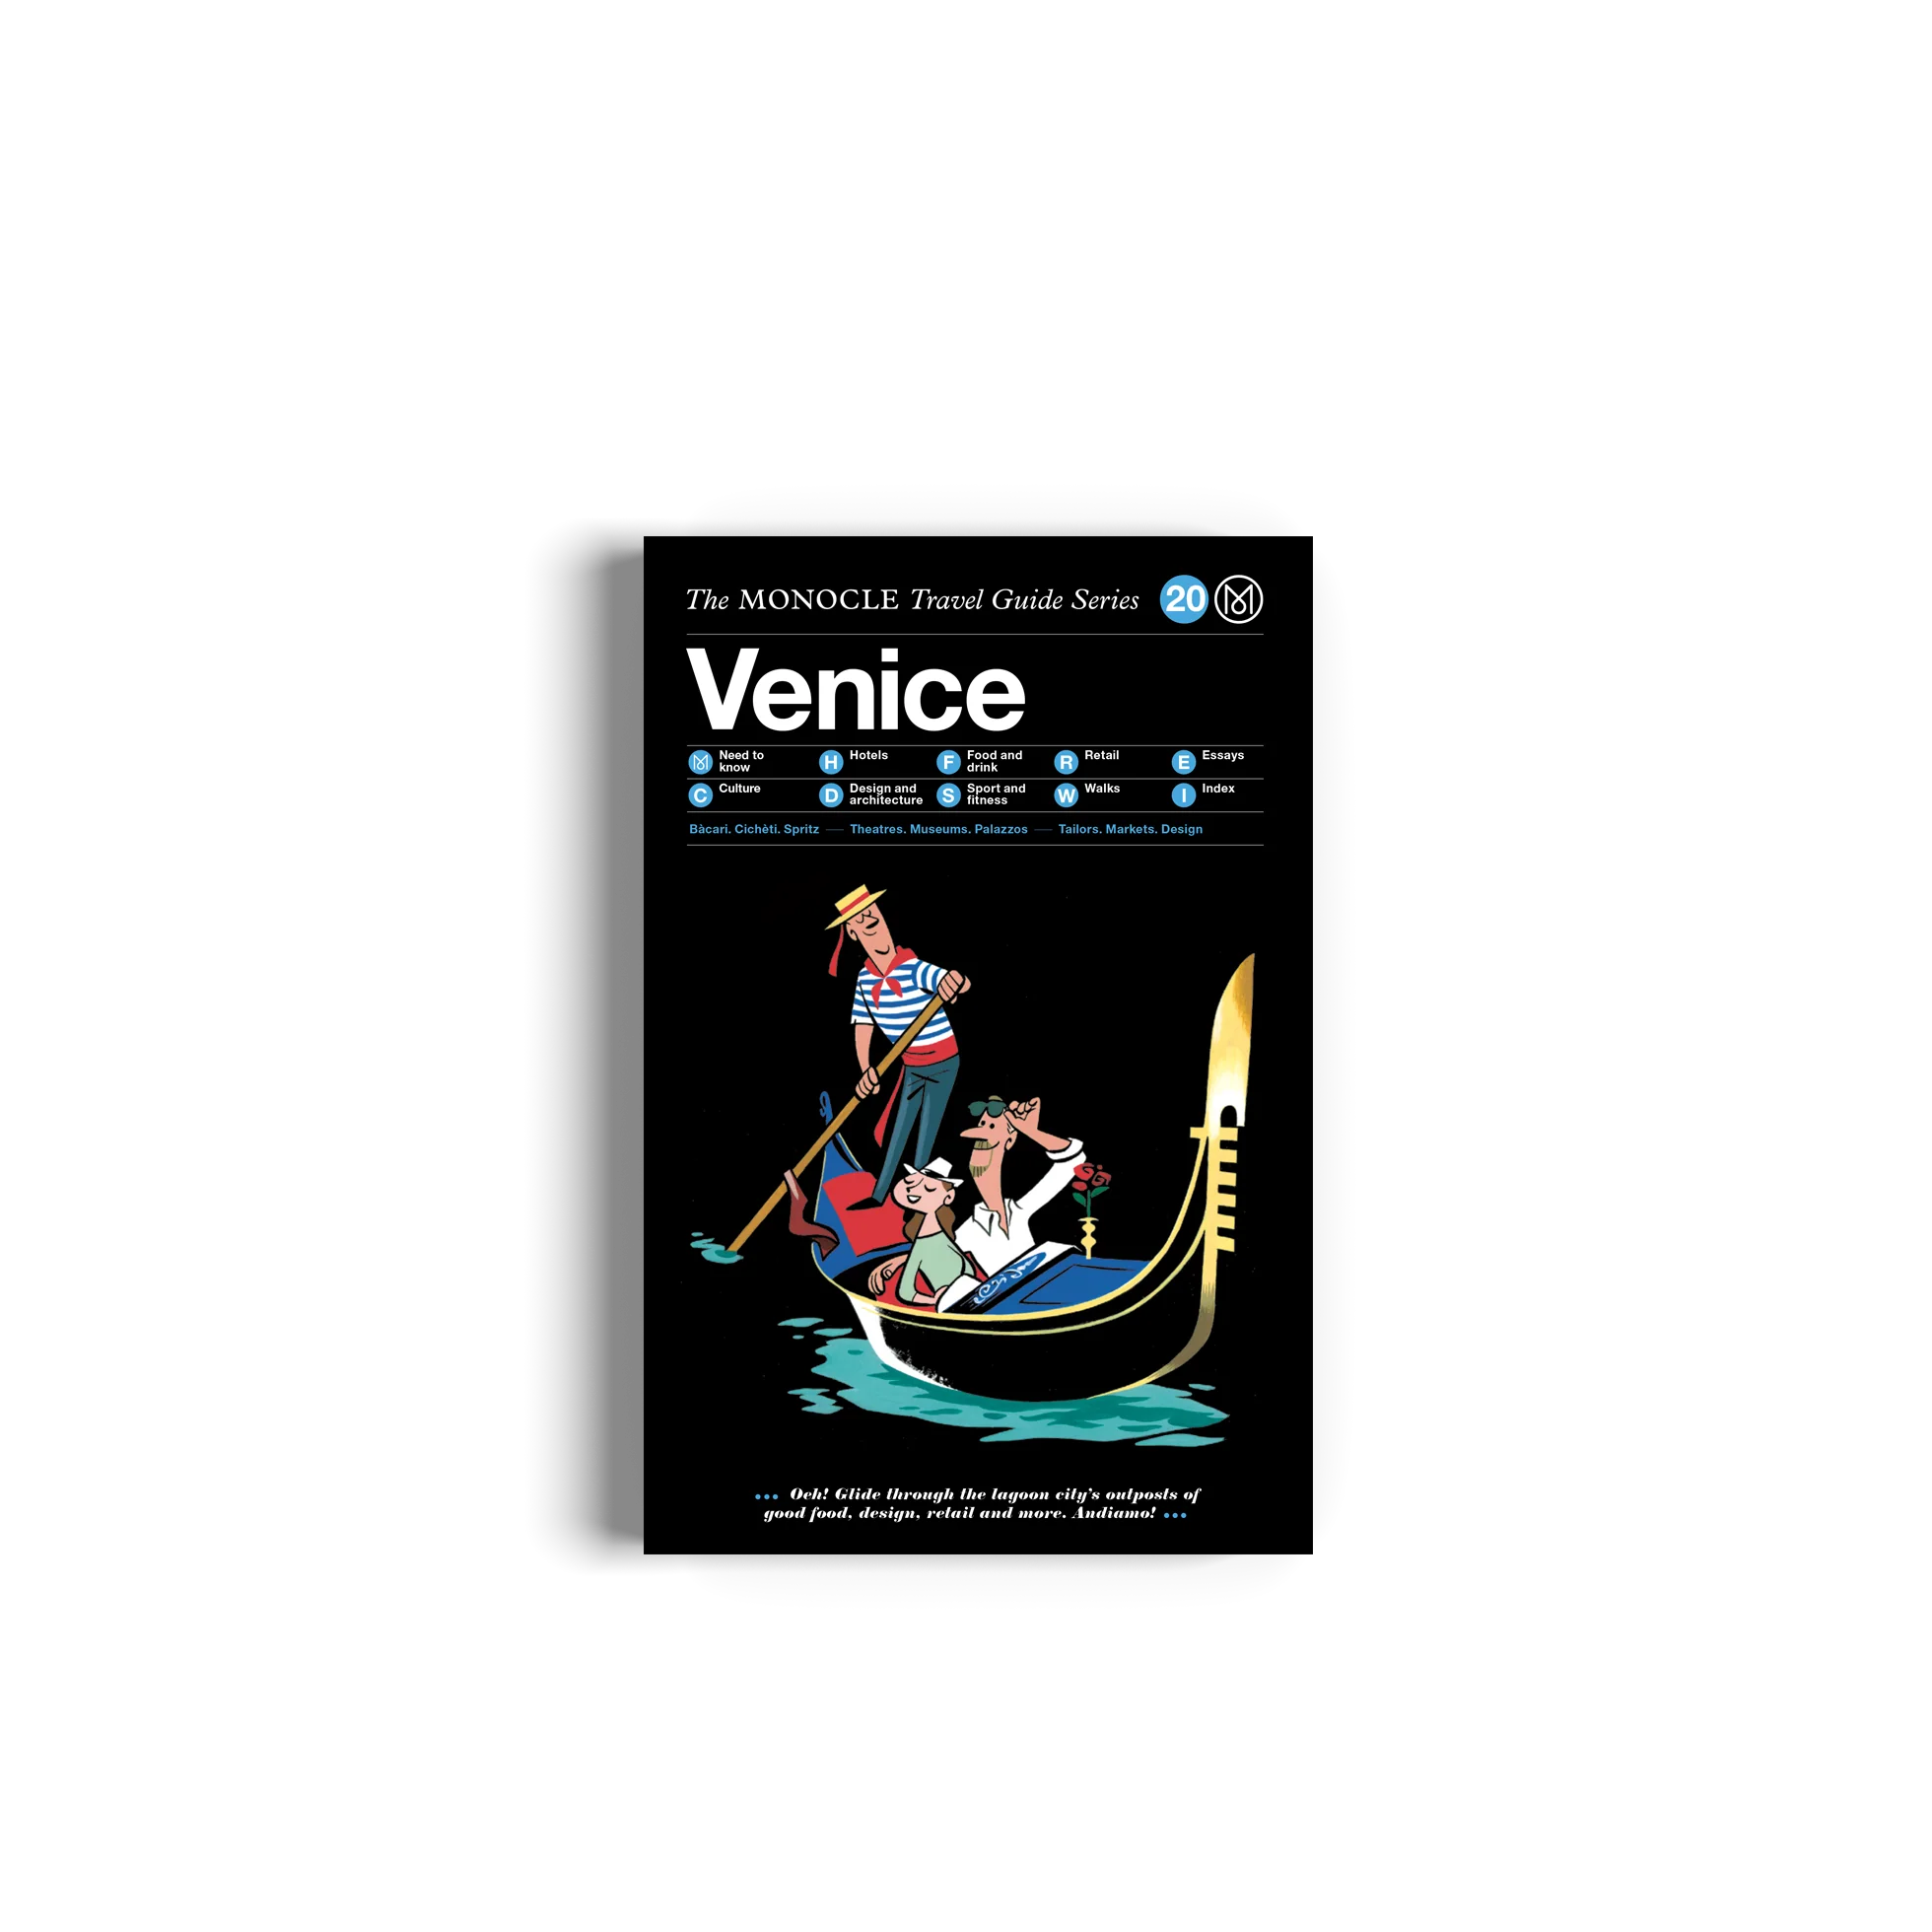 VENICE: THE MONOCLE TRAVEL GUIDE SERIES